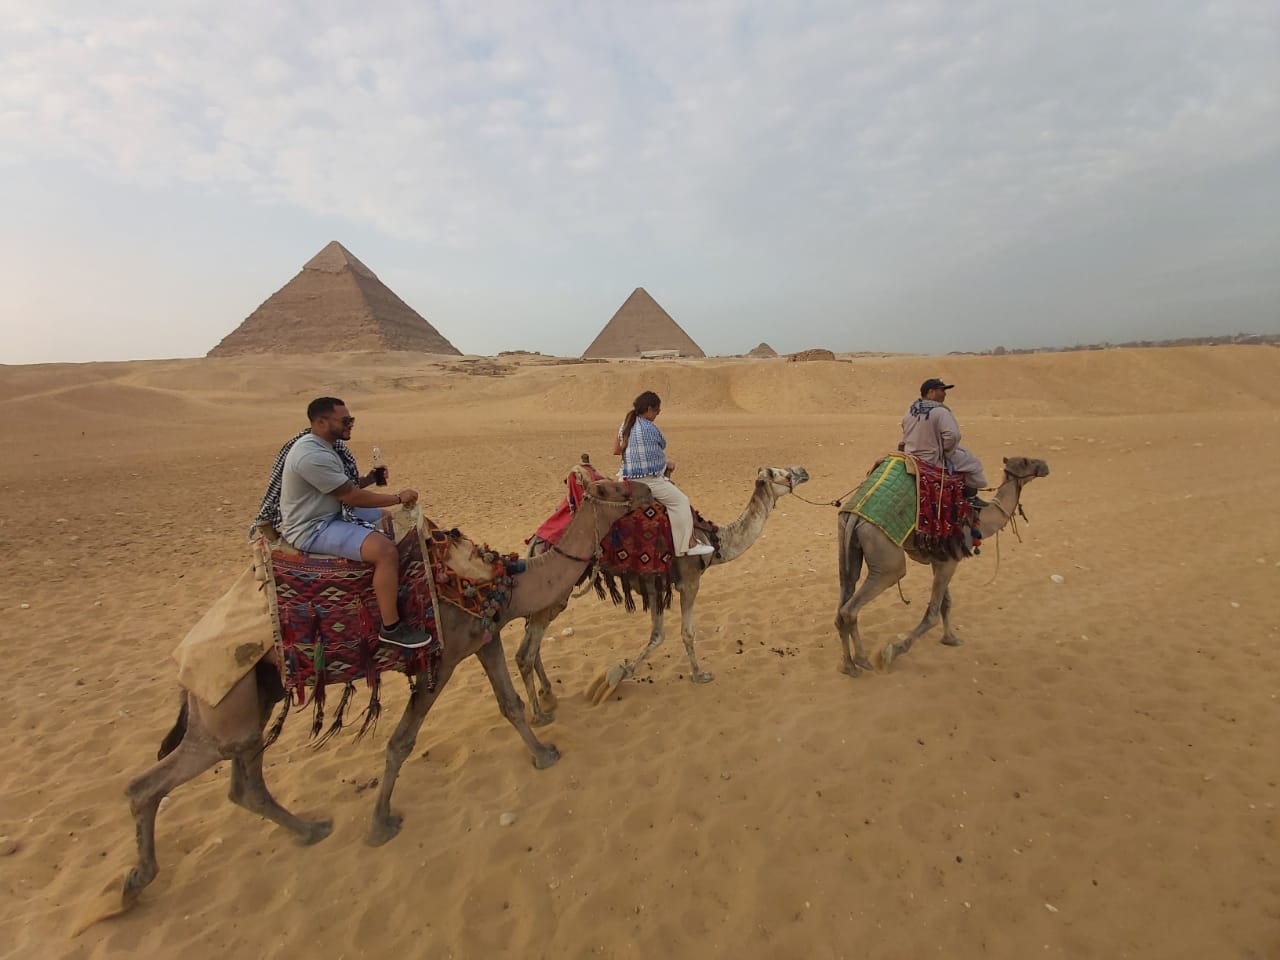 CAMEL RIDE PRIVATE AT THE PYRAMIDS SUNRISE | SUNSET